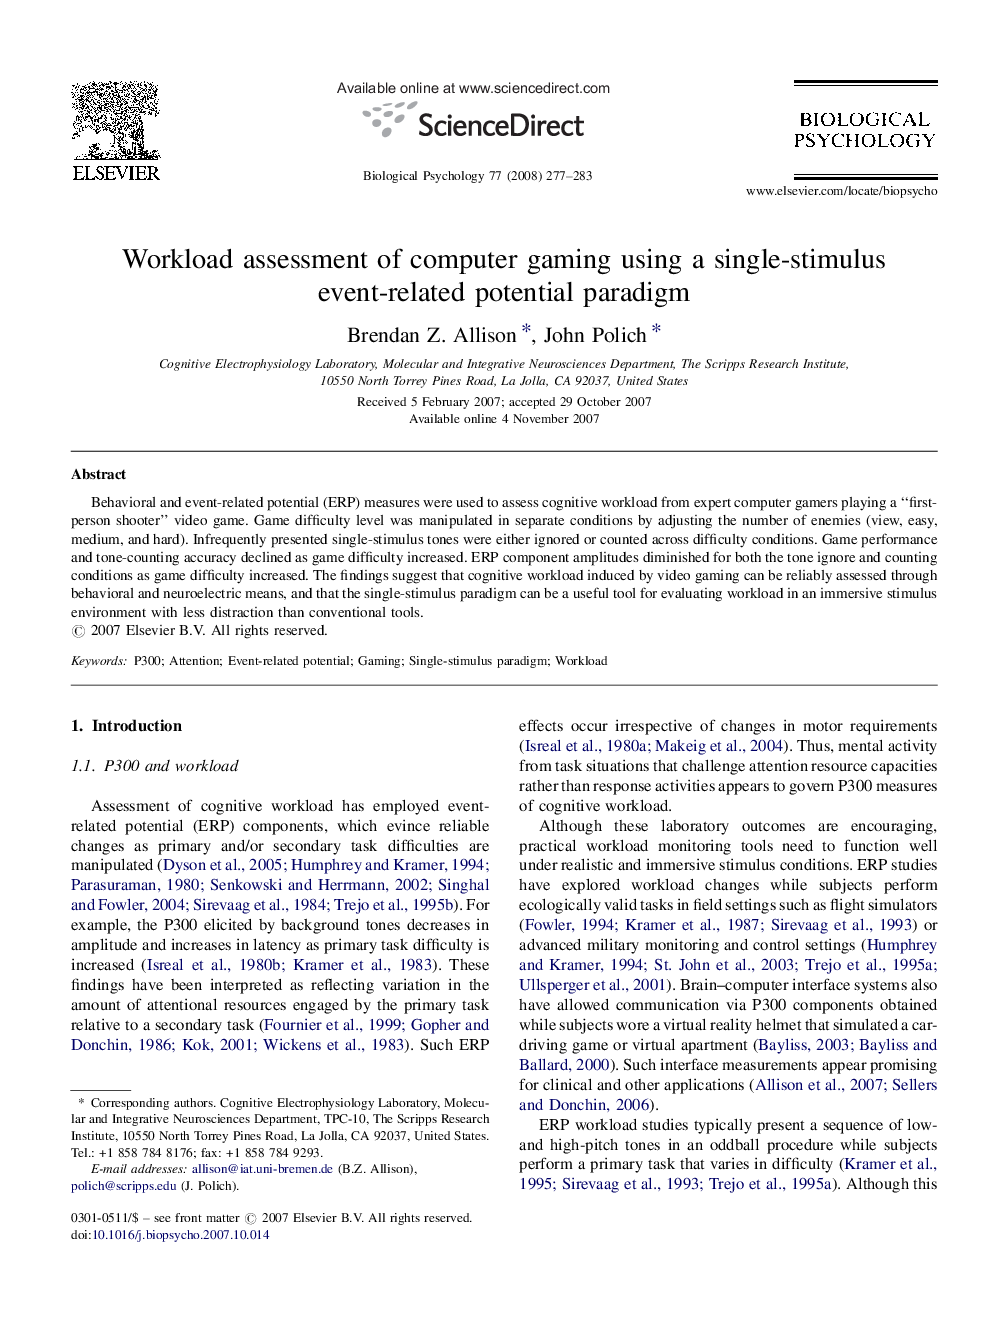 Workload assessment of computer gaming using a single-stimulus event-related potential paradigm